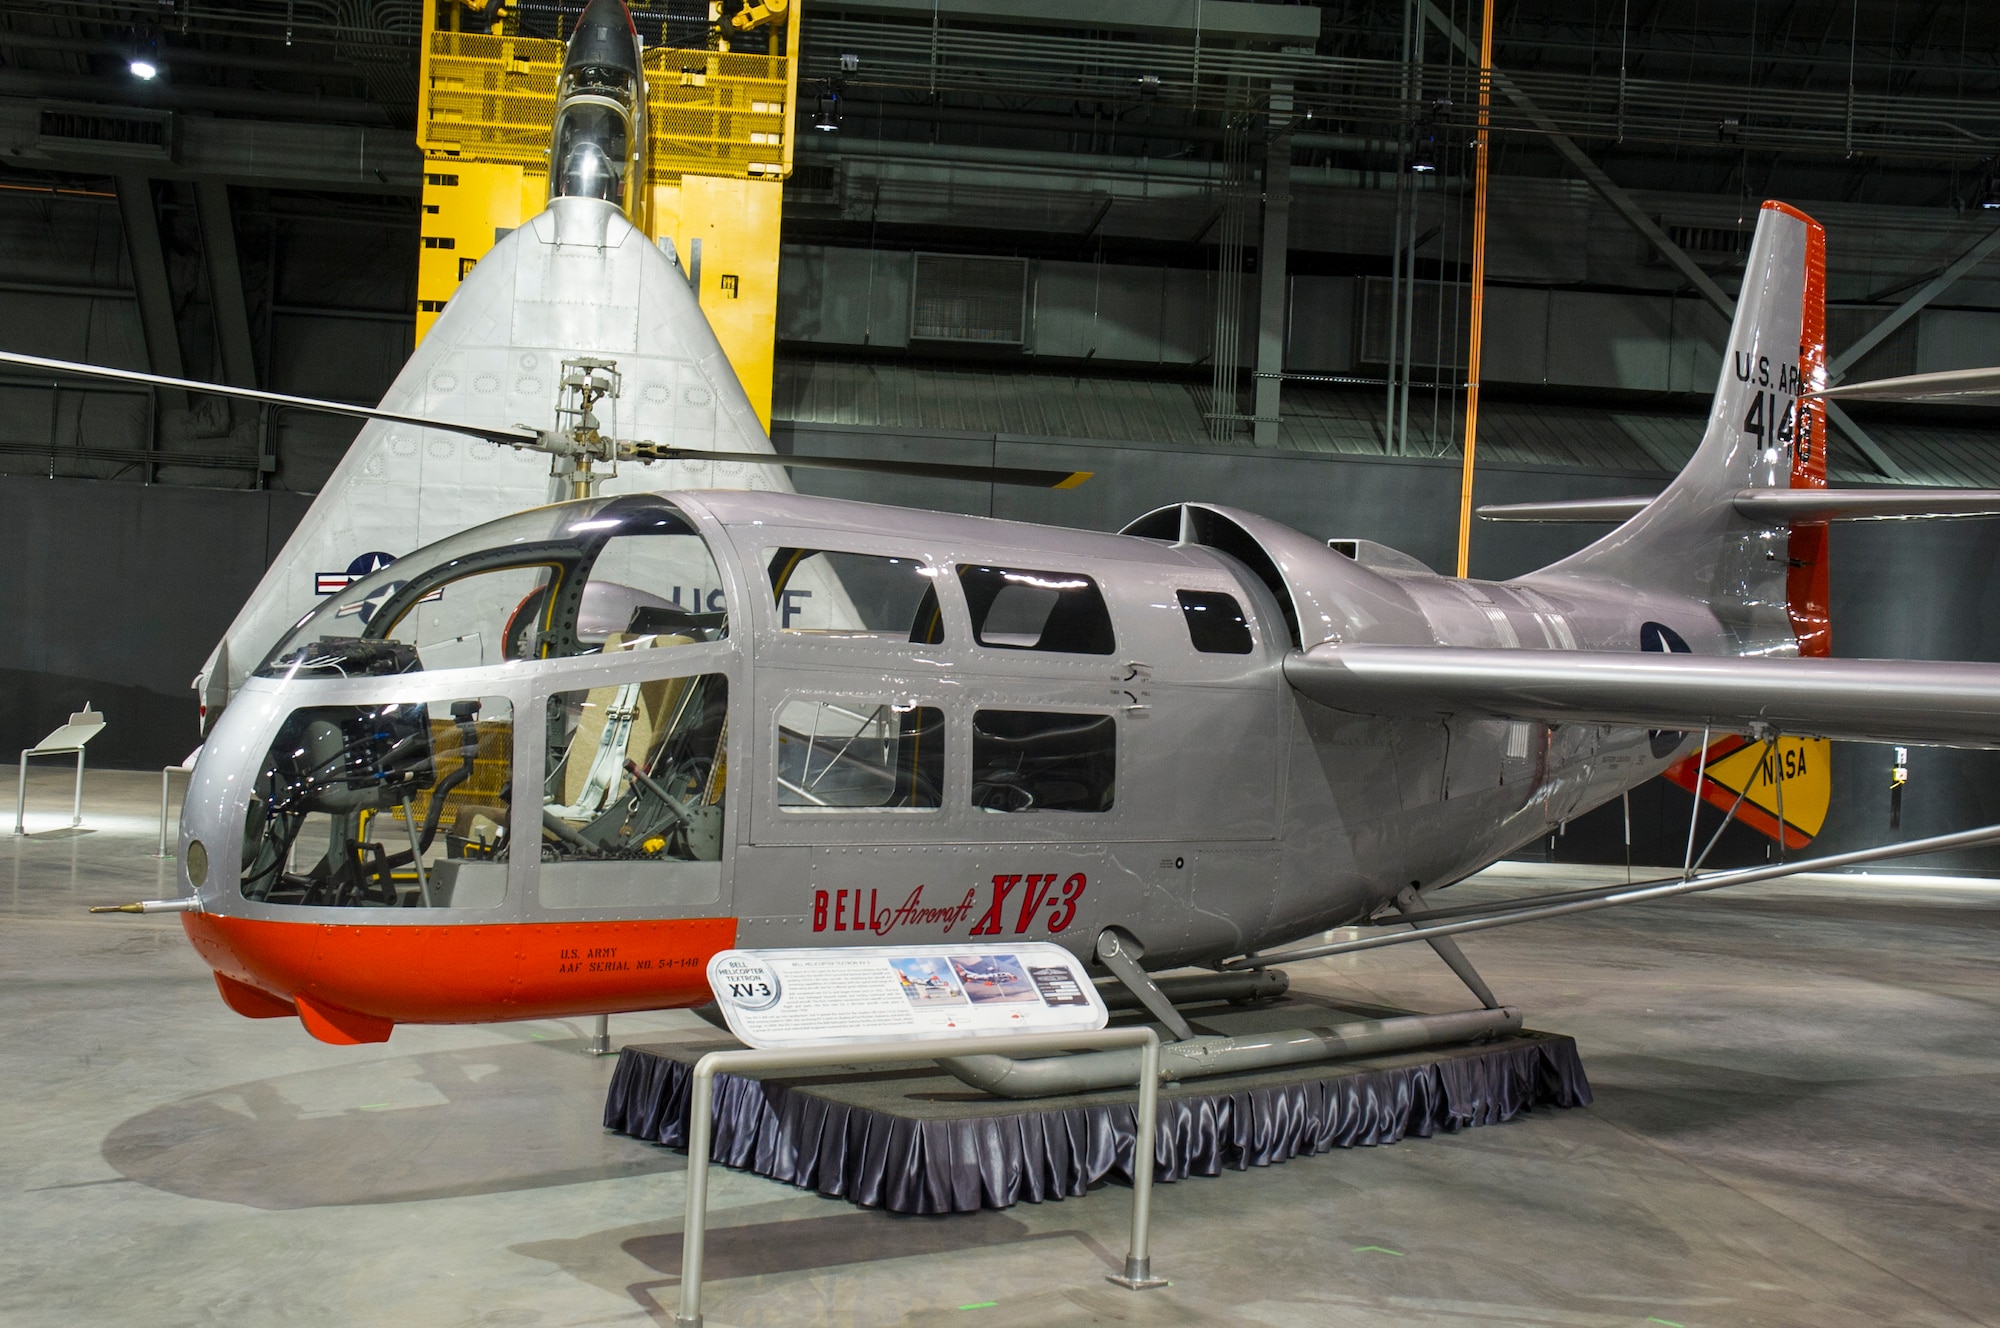 DAYTON, Ohio -- Bell Helicopter Textron XV-3 in the Research & Development Gallery at the National Museum of the U.S. Air Force. (U.S. Air Force photo by Ken LaRock)